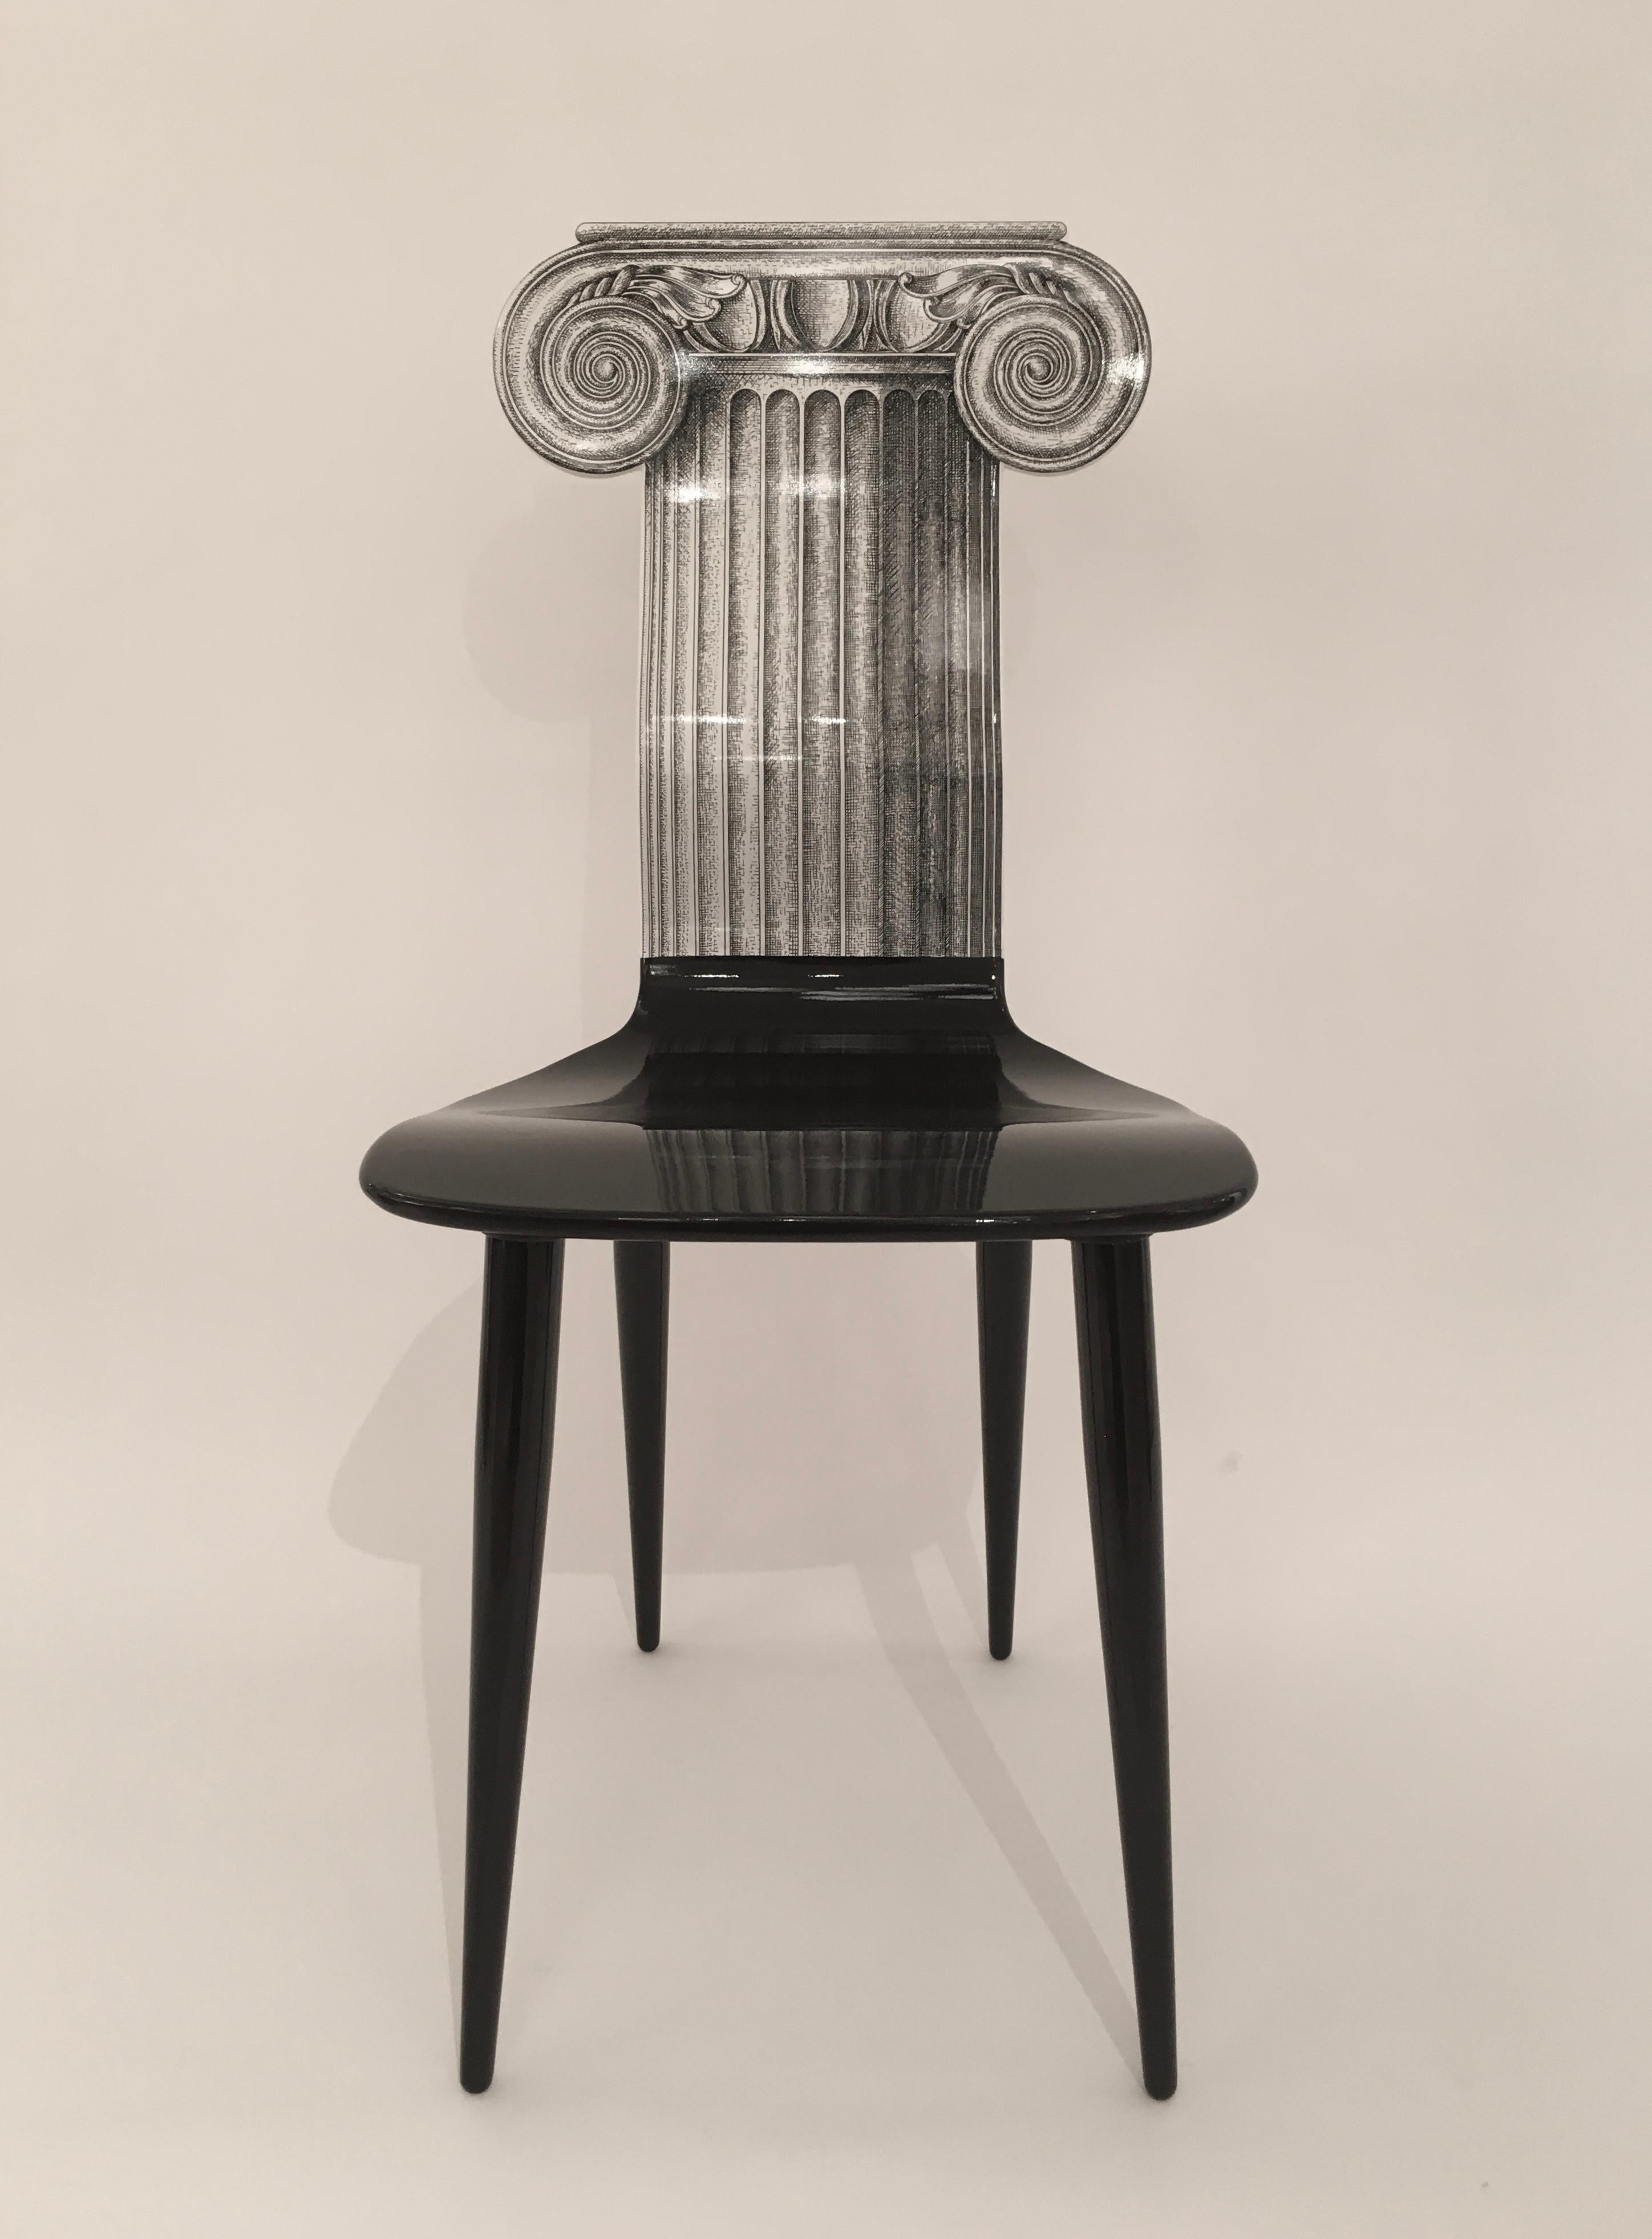 A wonderful 'Capitello Ionico' or 'Ionic Capital' wooden chair designed by the great Piero Fornasetti. Originally designed in the 1980, this particular chair is numbered #24 from a very limited number in 2006. In fantastic condition, this is one of